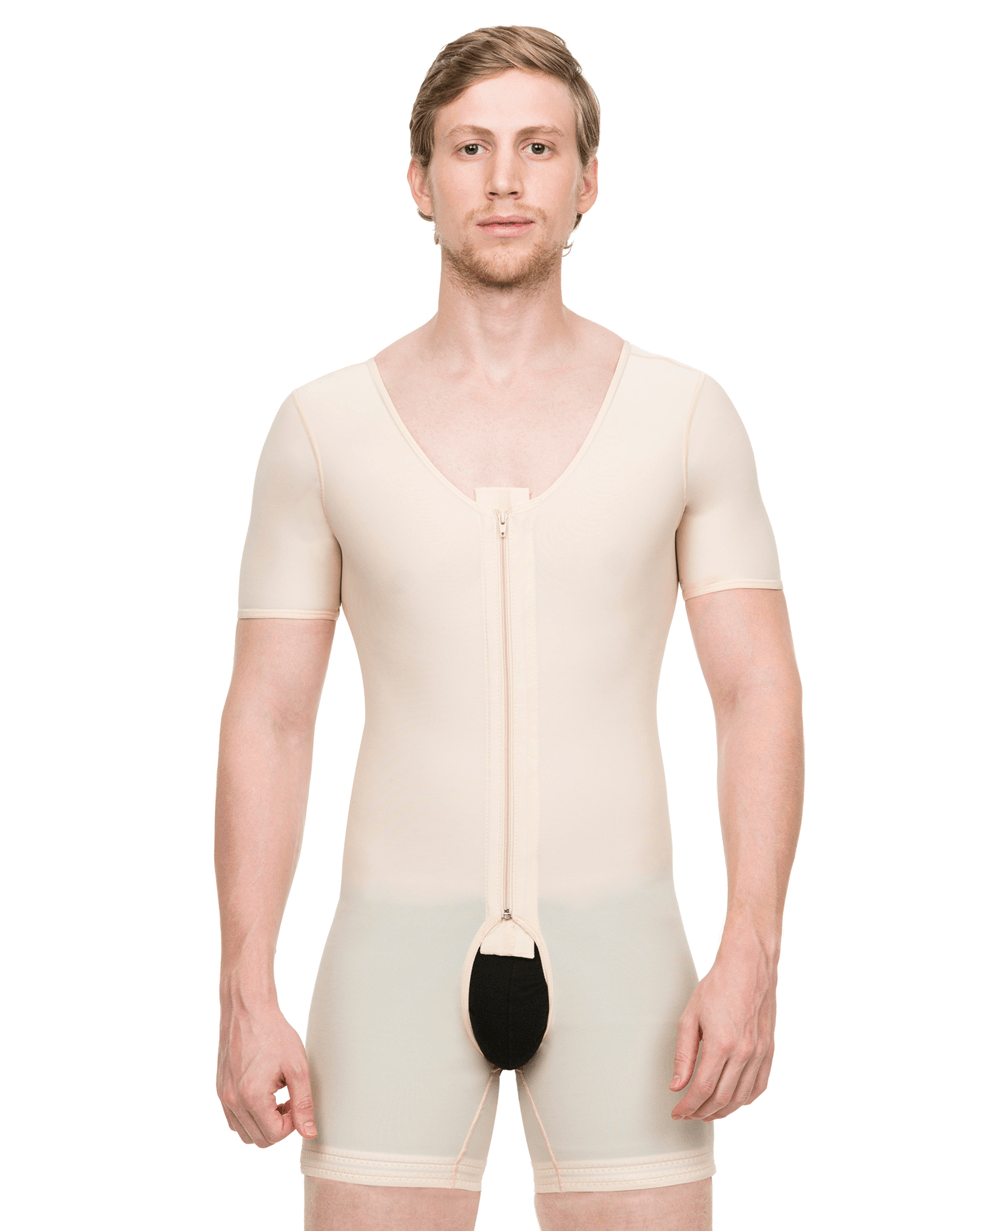 Male Full Body Above Knee Length Abdominal Cosmetic Surgery Compression Garment with Zipper (Short Sleeve) (MG07) - Isavela Compression Garments